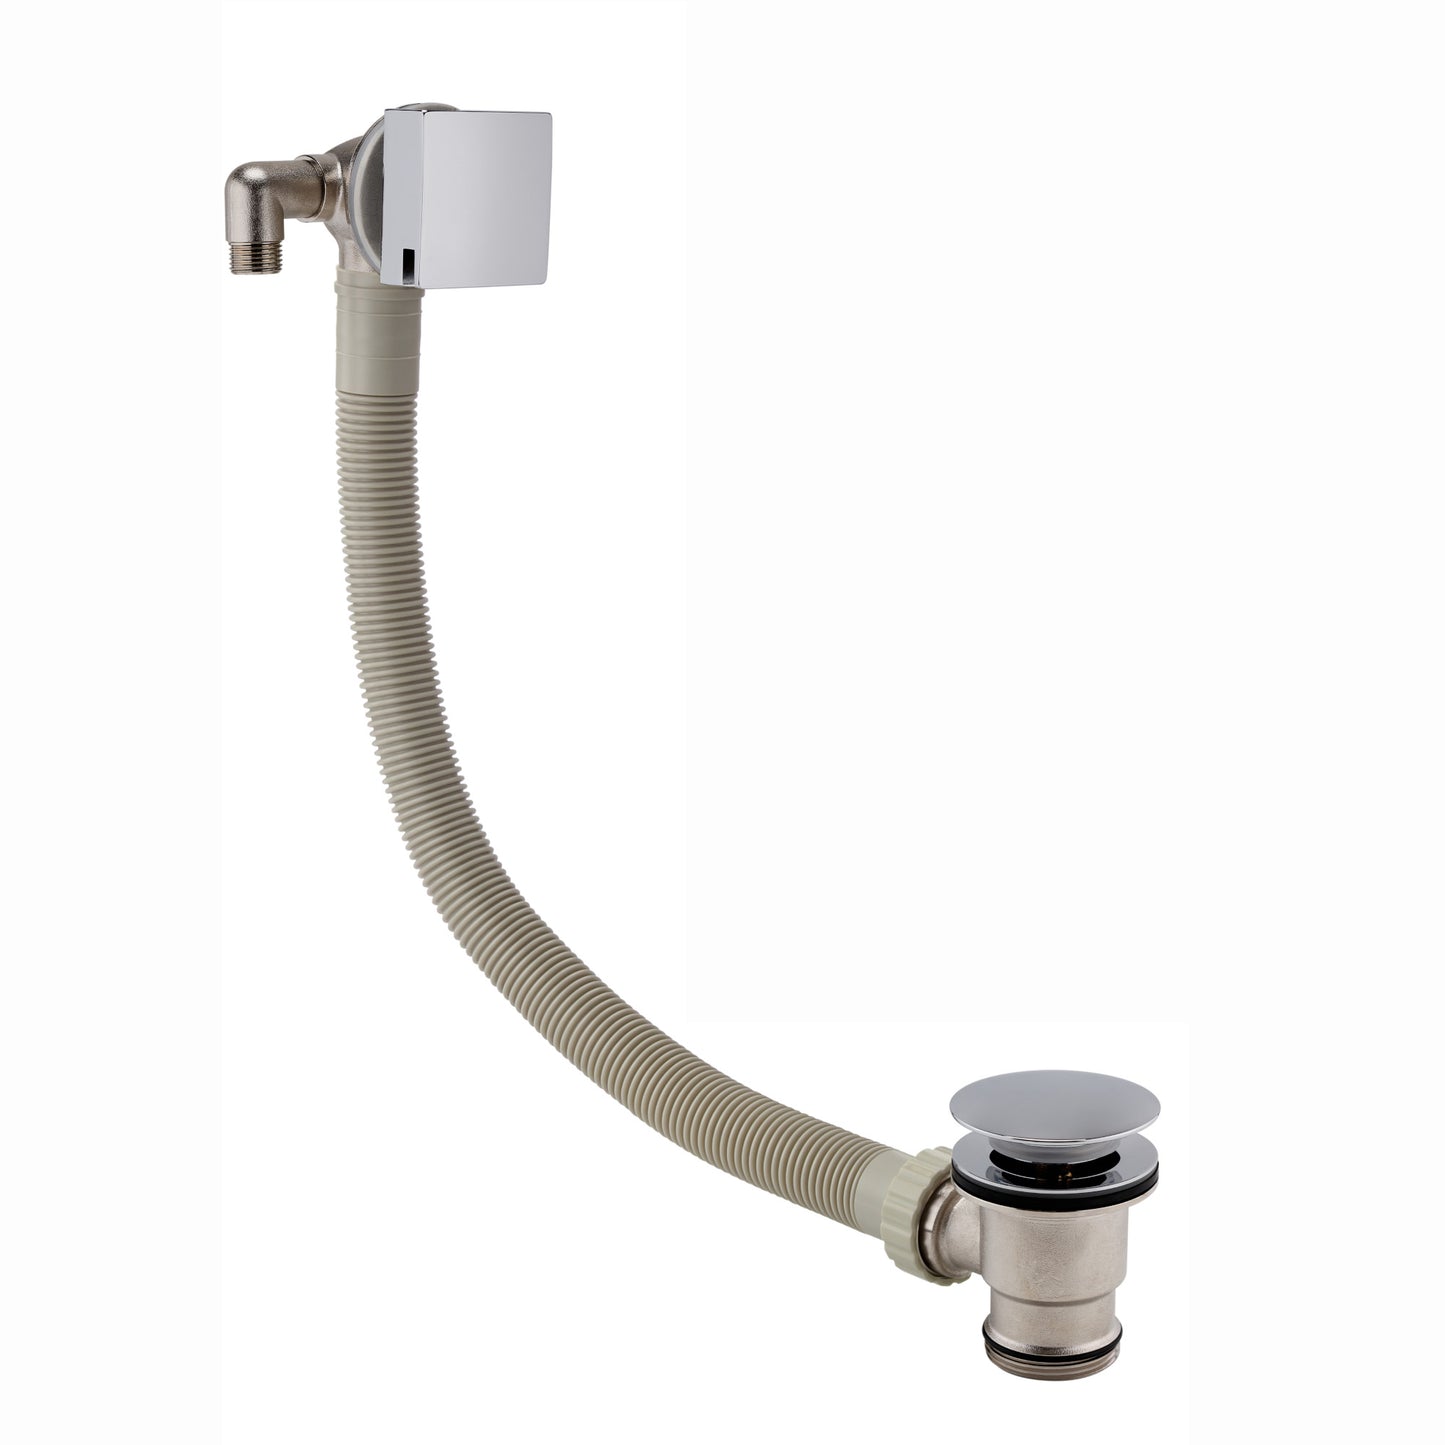 Square freeflow bath filler with overflow and clicker waste - chrome - Taps